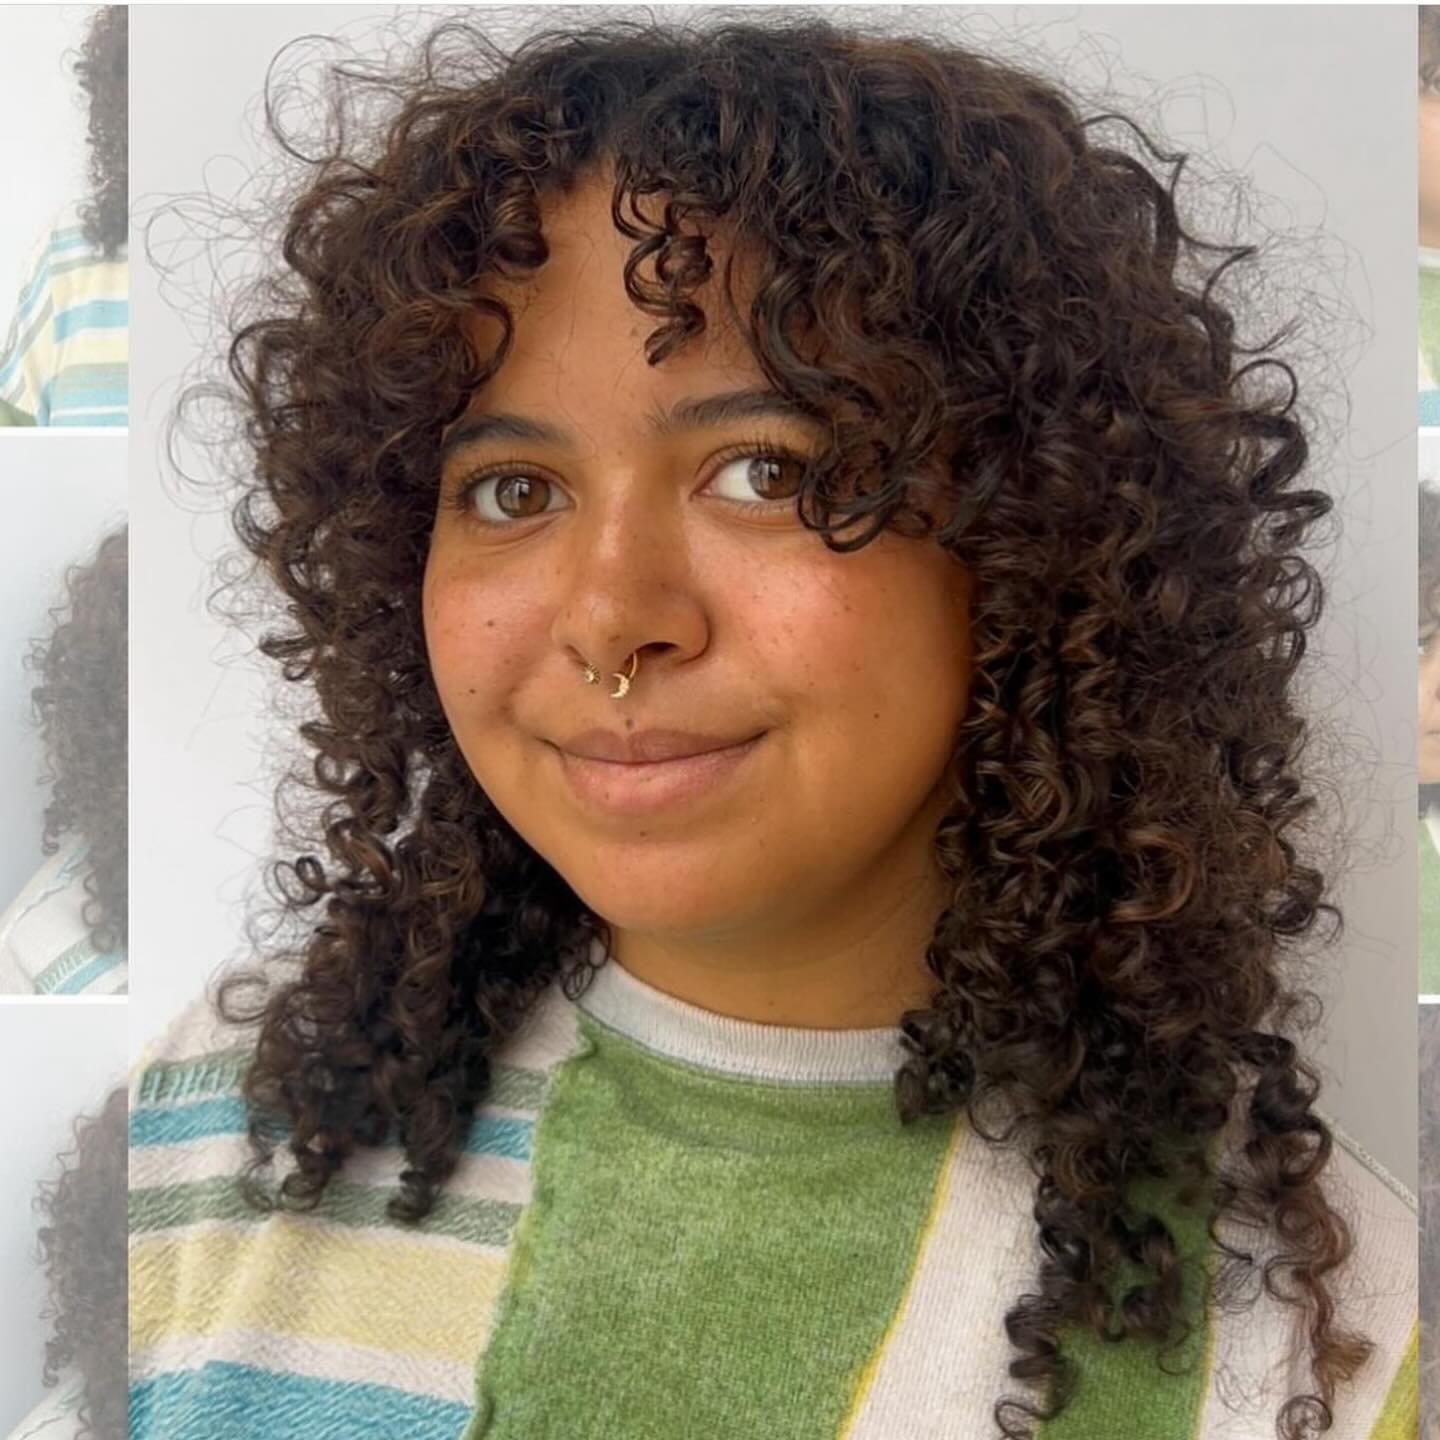 A summer glow for Rylee&rsquo;s curls by @hairgalkylie 
.
 Swipe for a close up &amp; a before pic!
.
#phillysalon #philadelphiahair #philadelphiahairstylist #philadelphiacurls #highlights #highlightedhair #philadelphiasalon